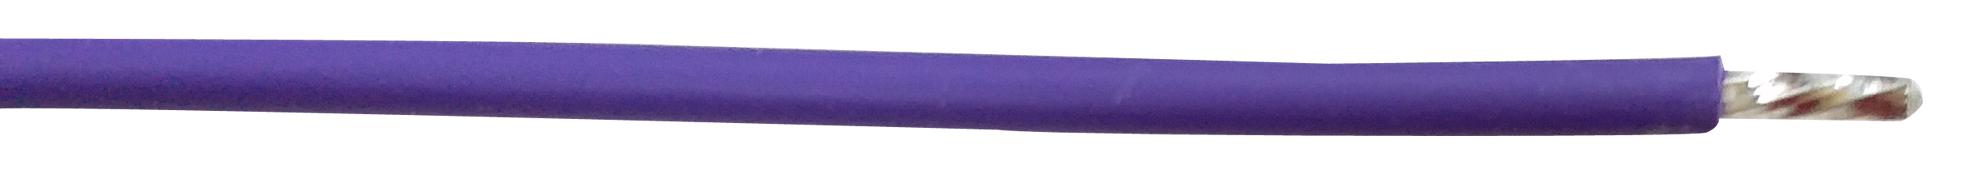 PP002395 HOOK-UP WIRE, 24AWG, PURPLE, 305M, 300V PRO POWER